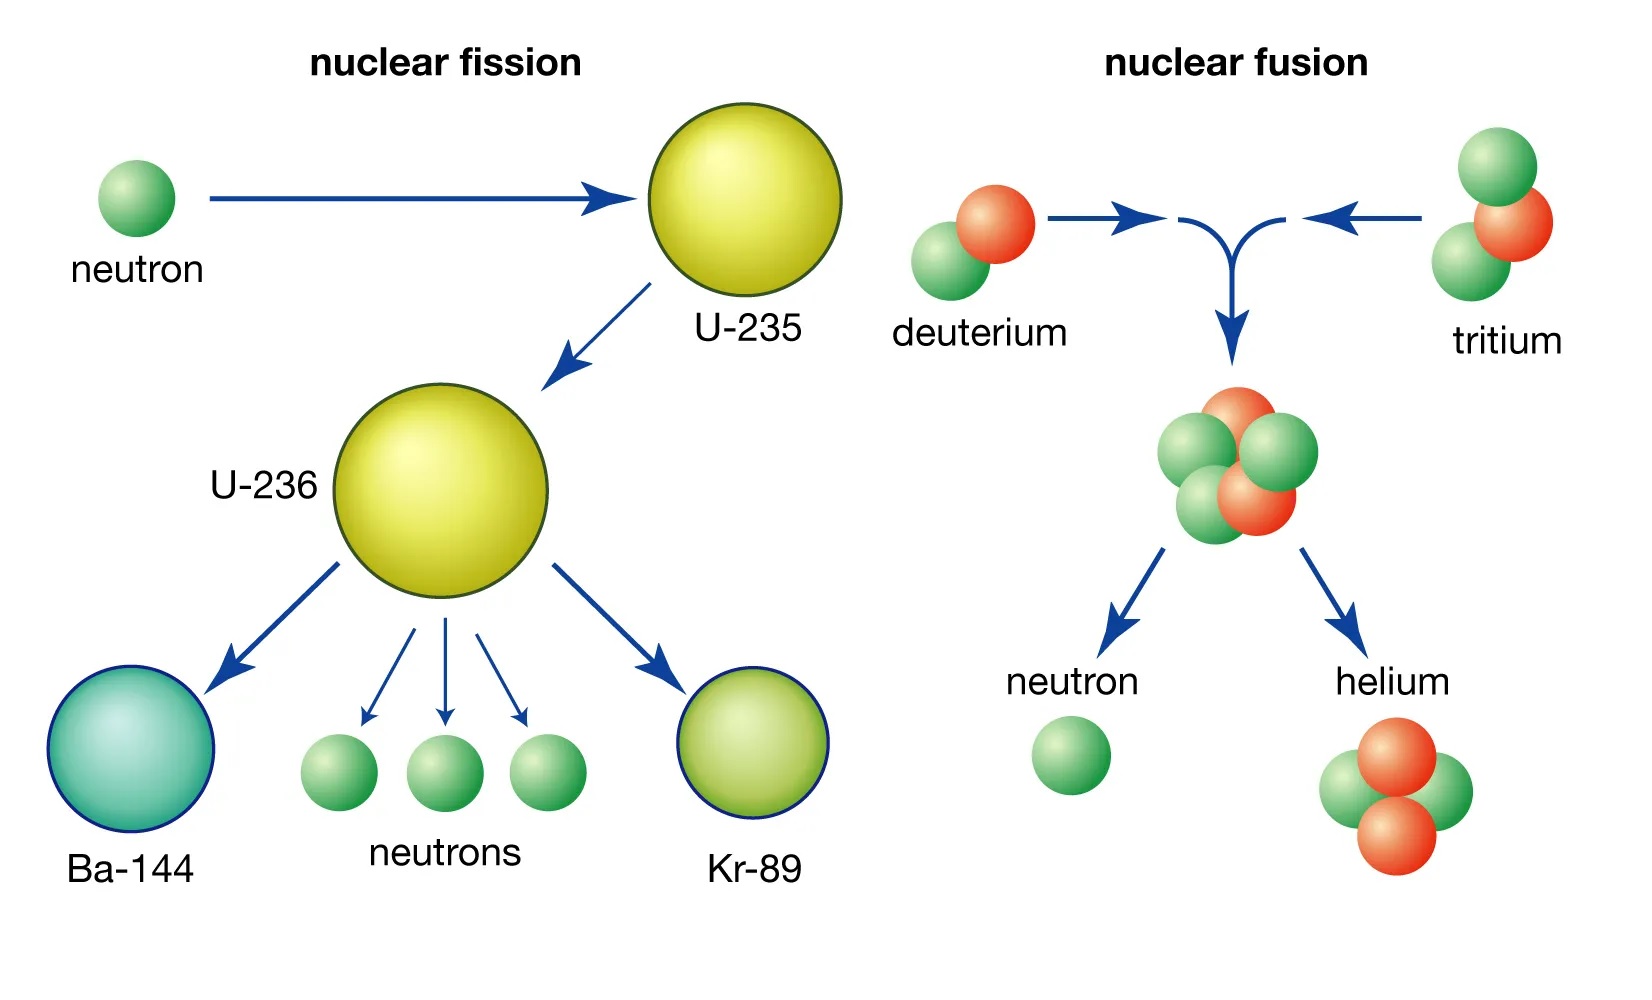 14-extraordinary-facts-about-nuclear-binding-energy